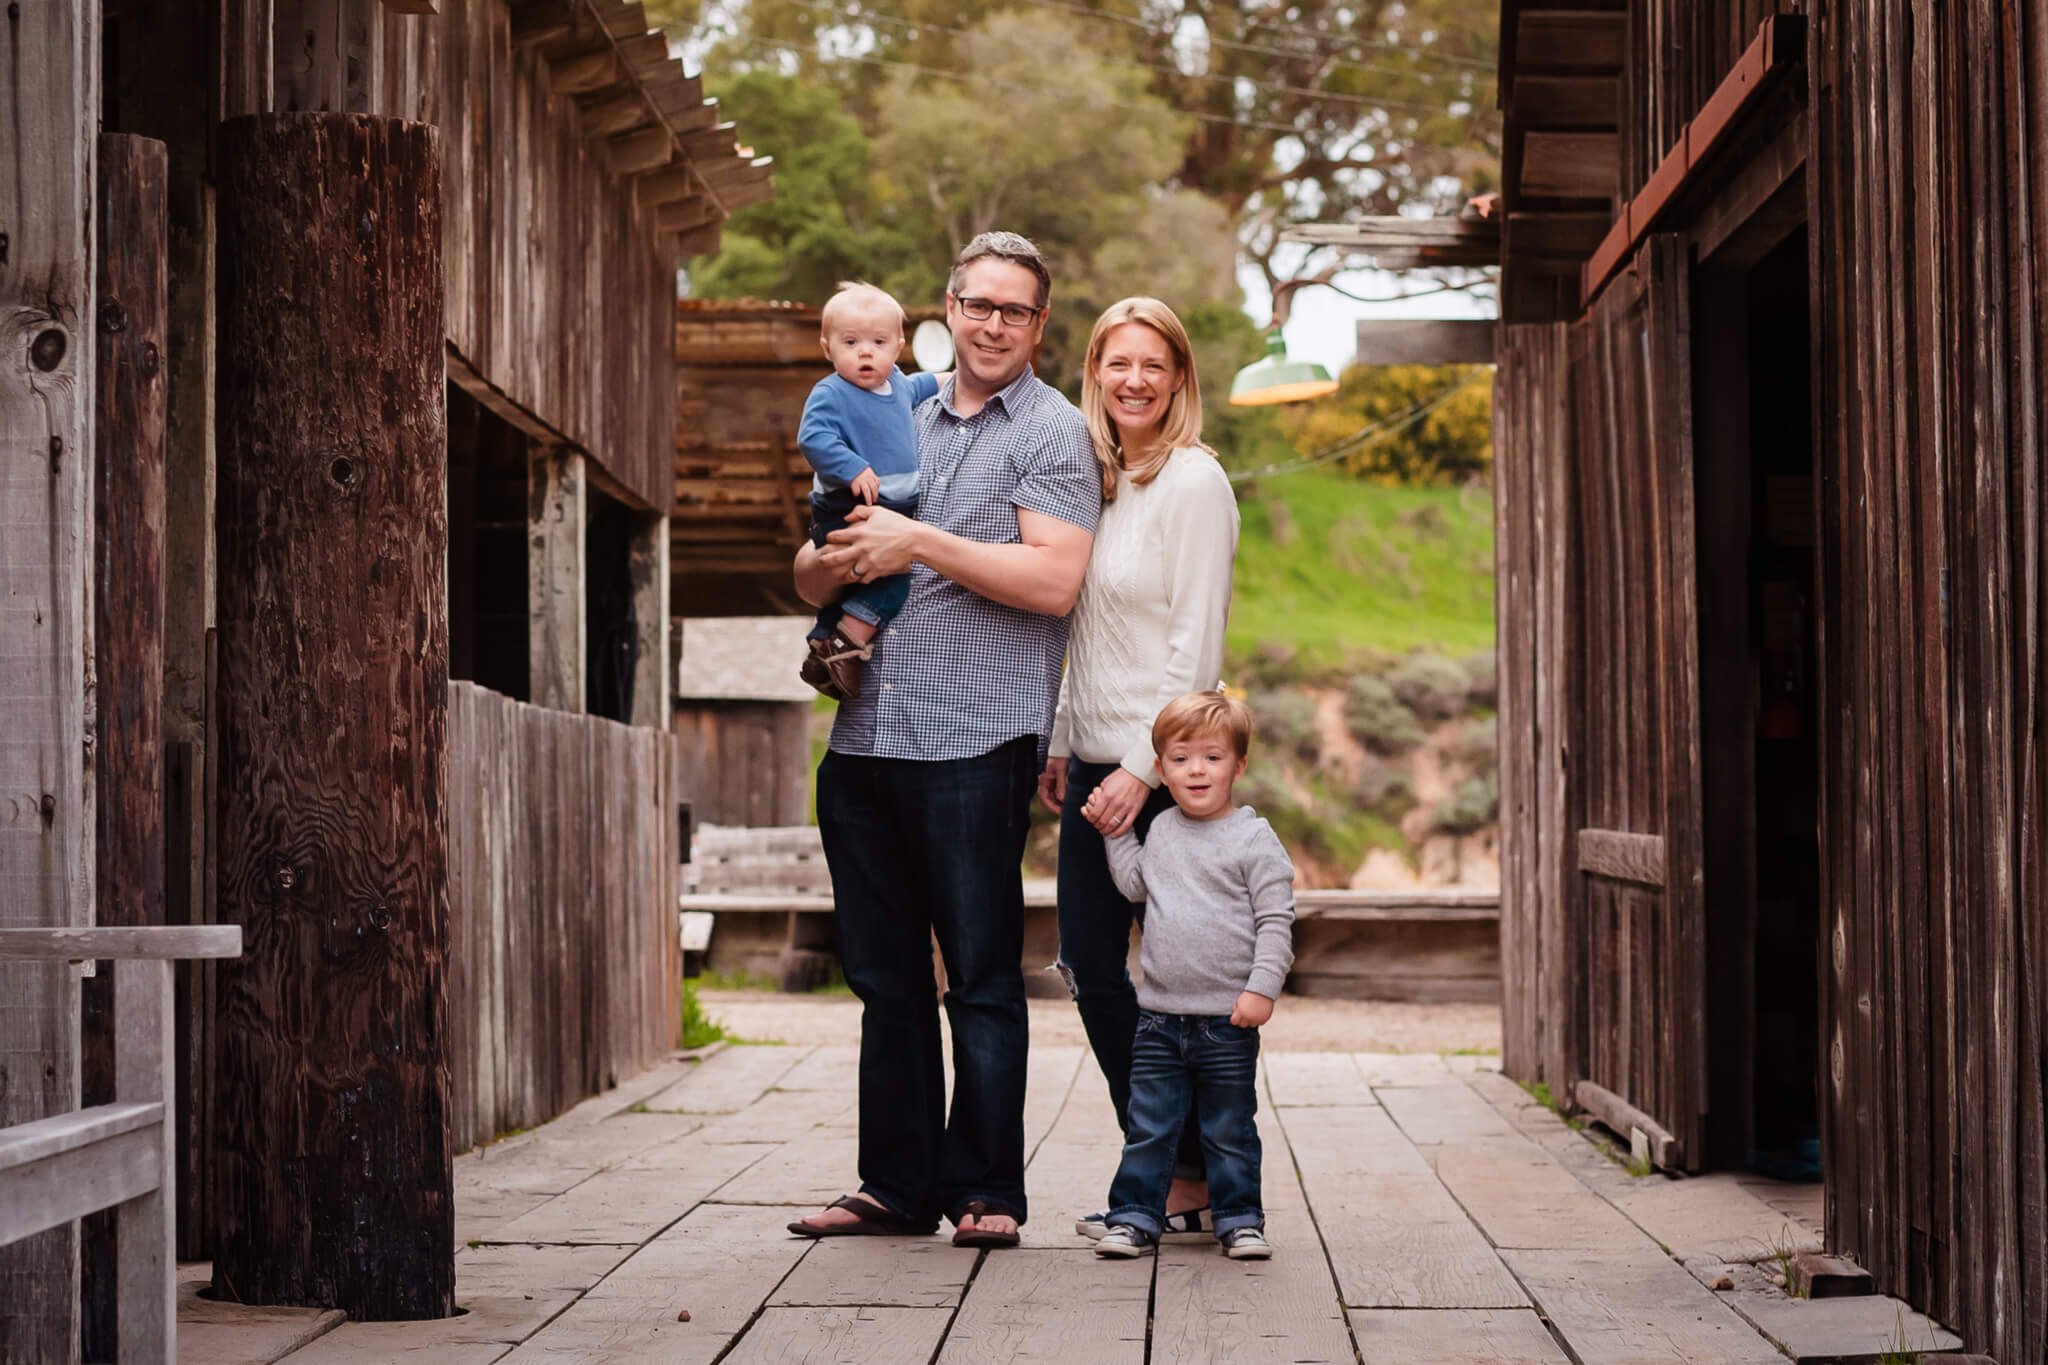 Kristin_Lunny_Photography_Families_Marin_Mill_Valley_San Francisco-4.jpg